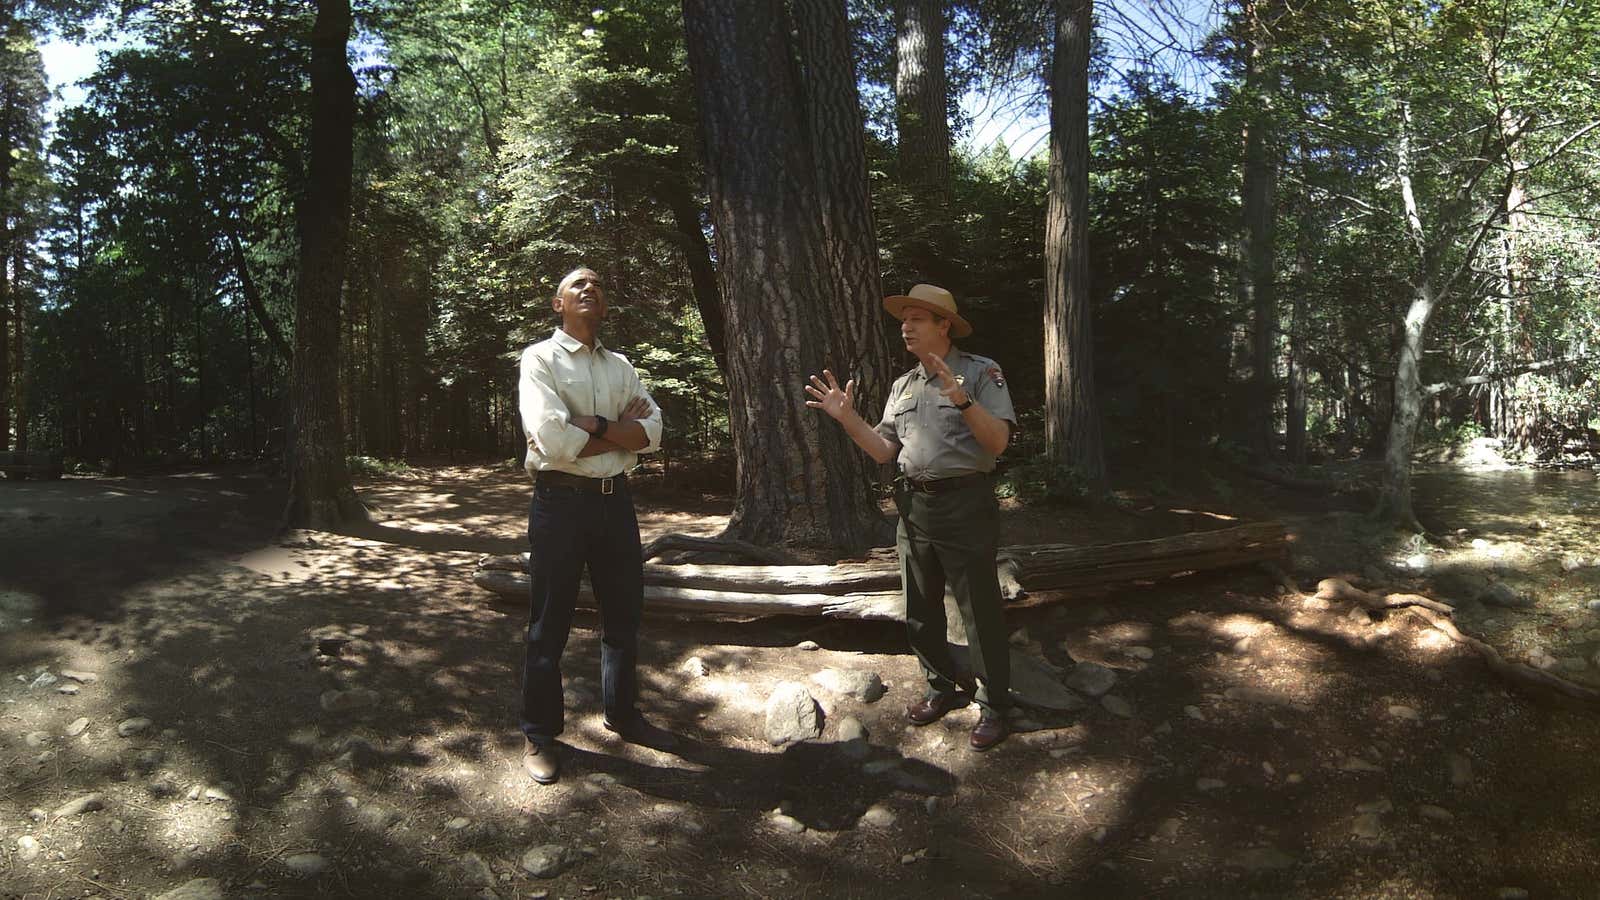 Listen in to Obama’s chat in the woods about National Parks.